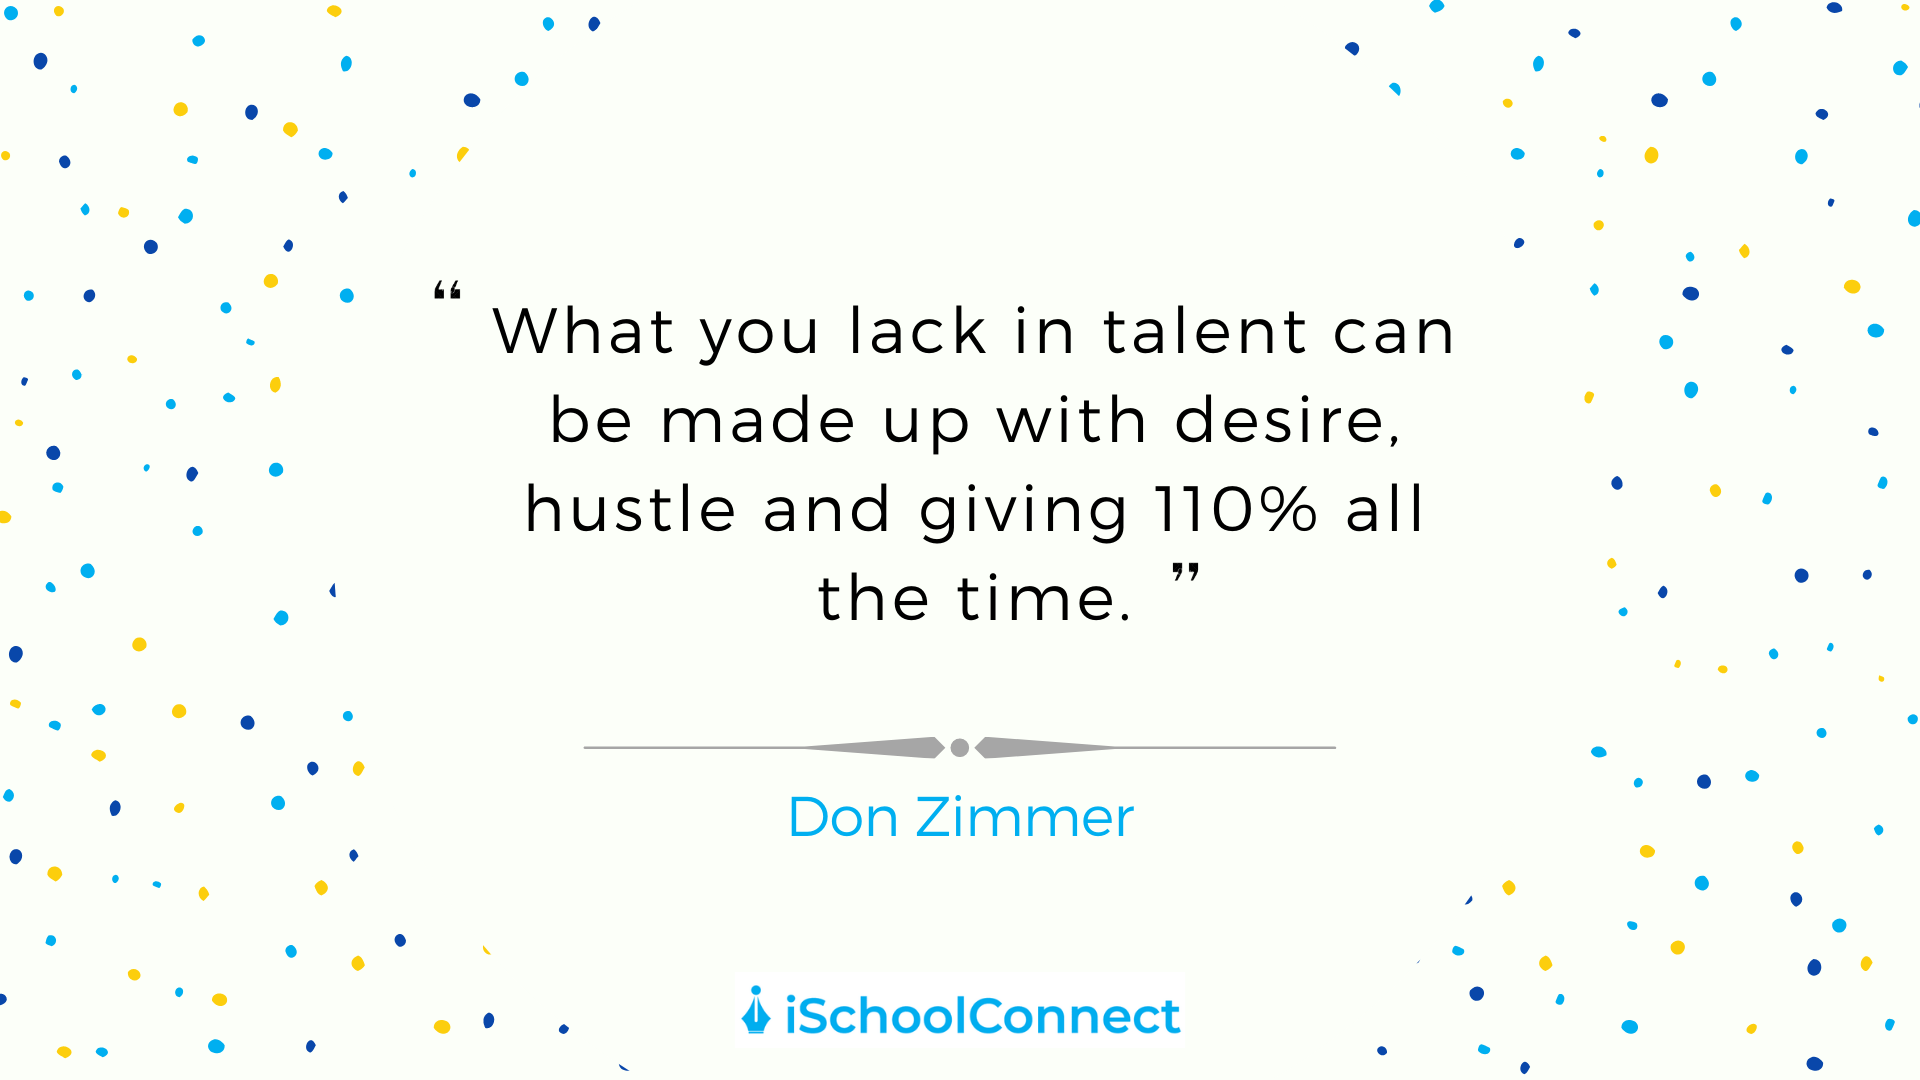 What You Lack In Talent Can Be Made Up With Desire, Hustle And Giving 110% All The Time.